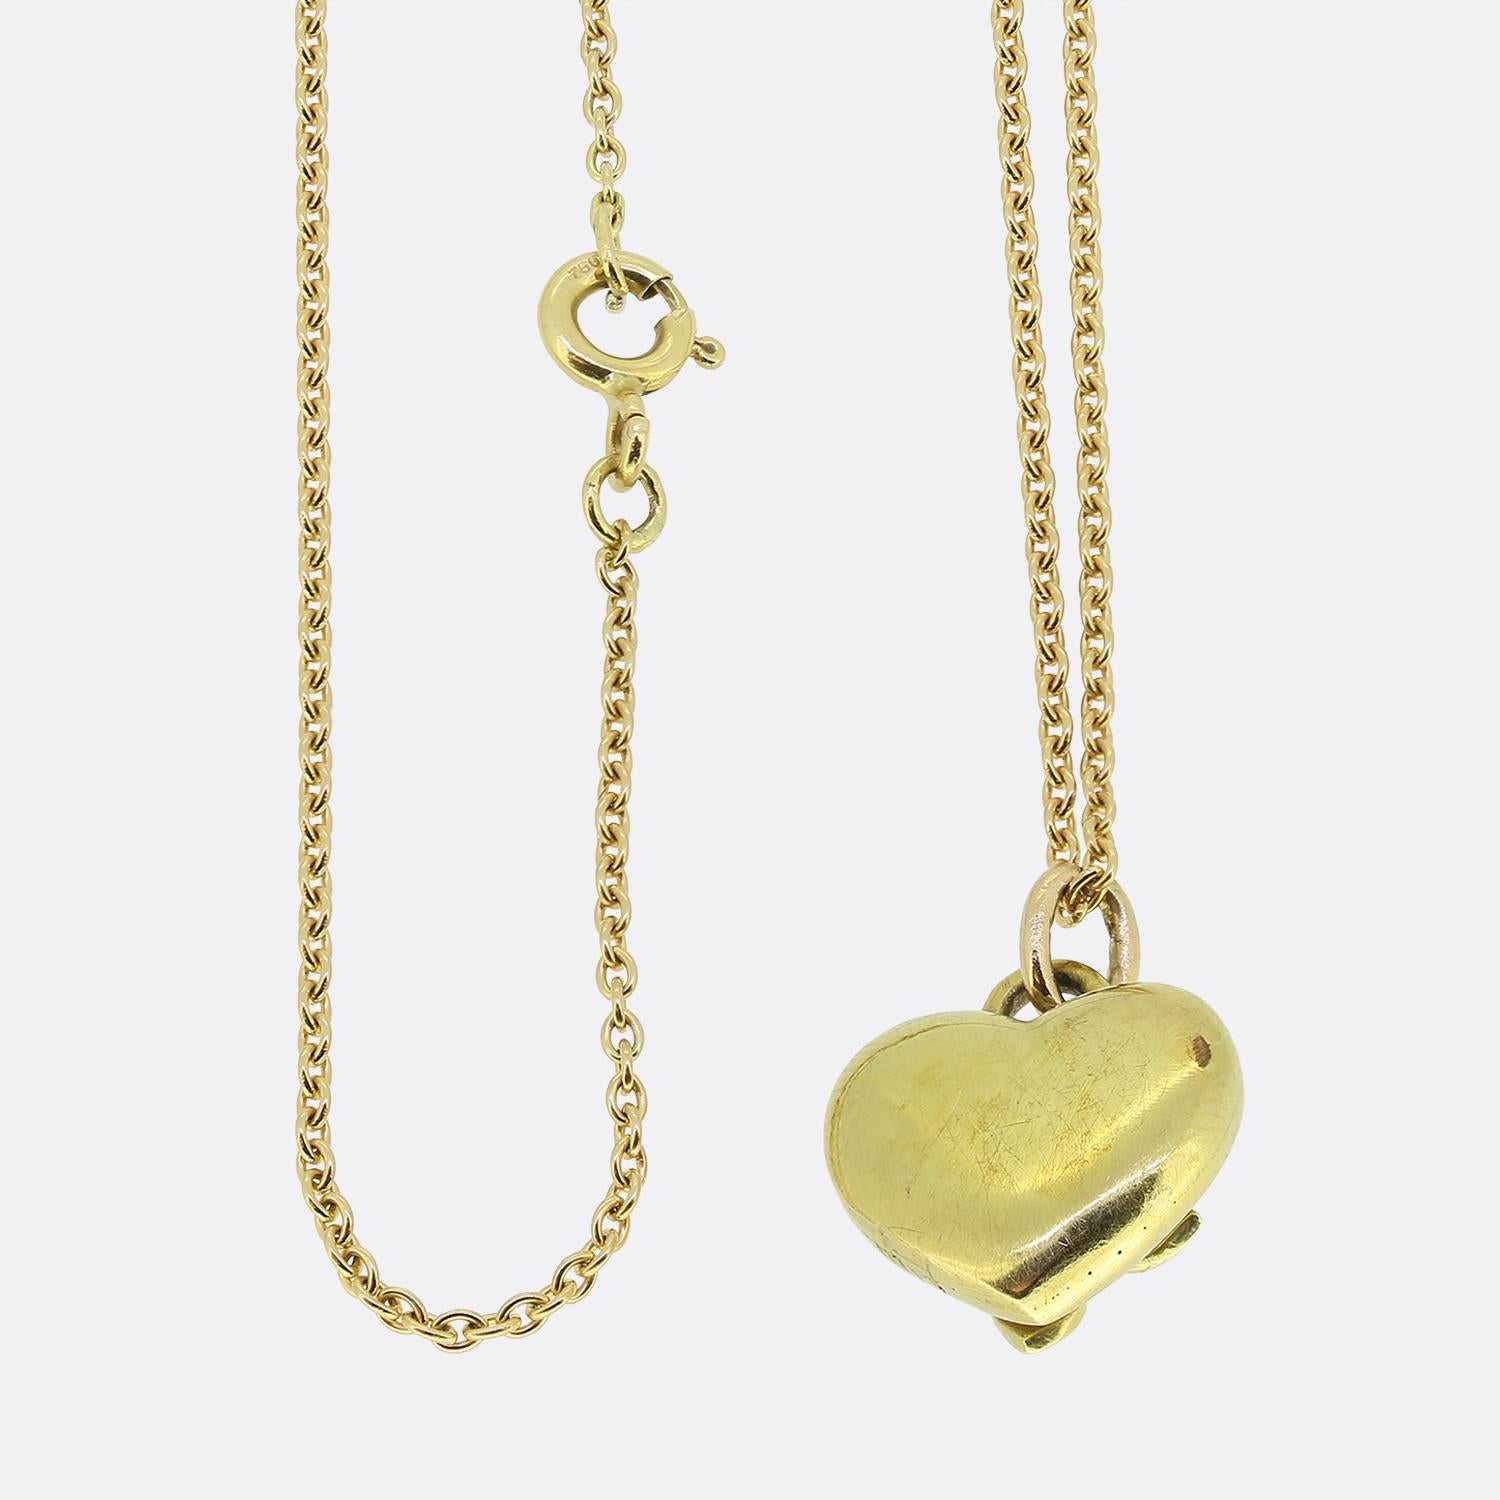 Here we have a wonderful pearl set pendant necklace. This antique pendant has been crafted from 18ct yellow gold into the the shape of a little love heart and expertly set with a quintet of perfectly matched round natural pearls in a floral